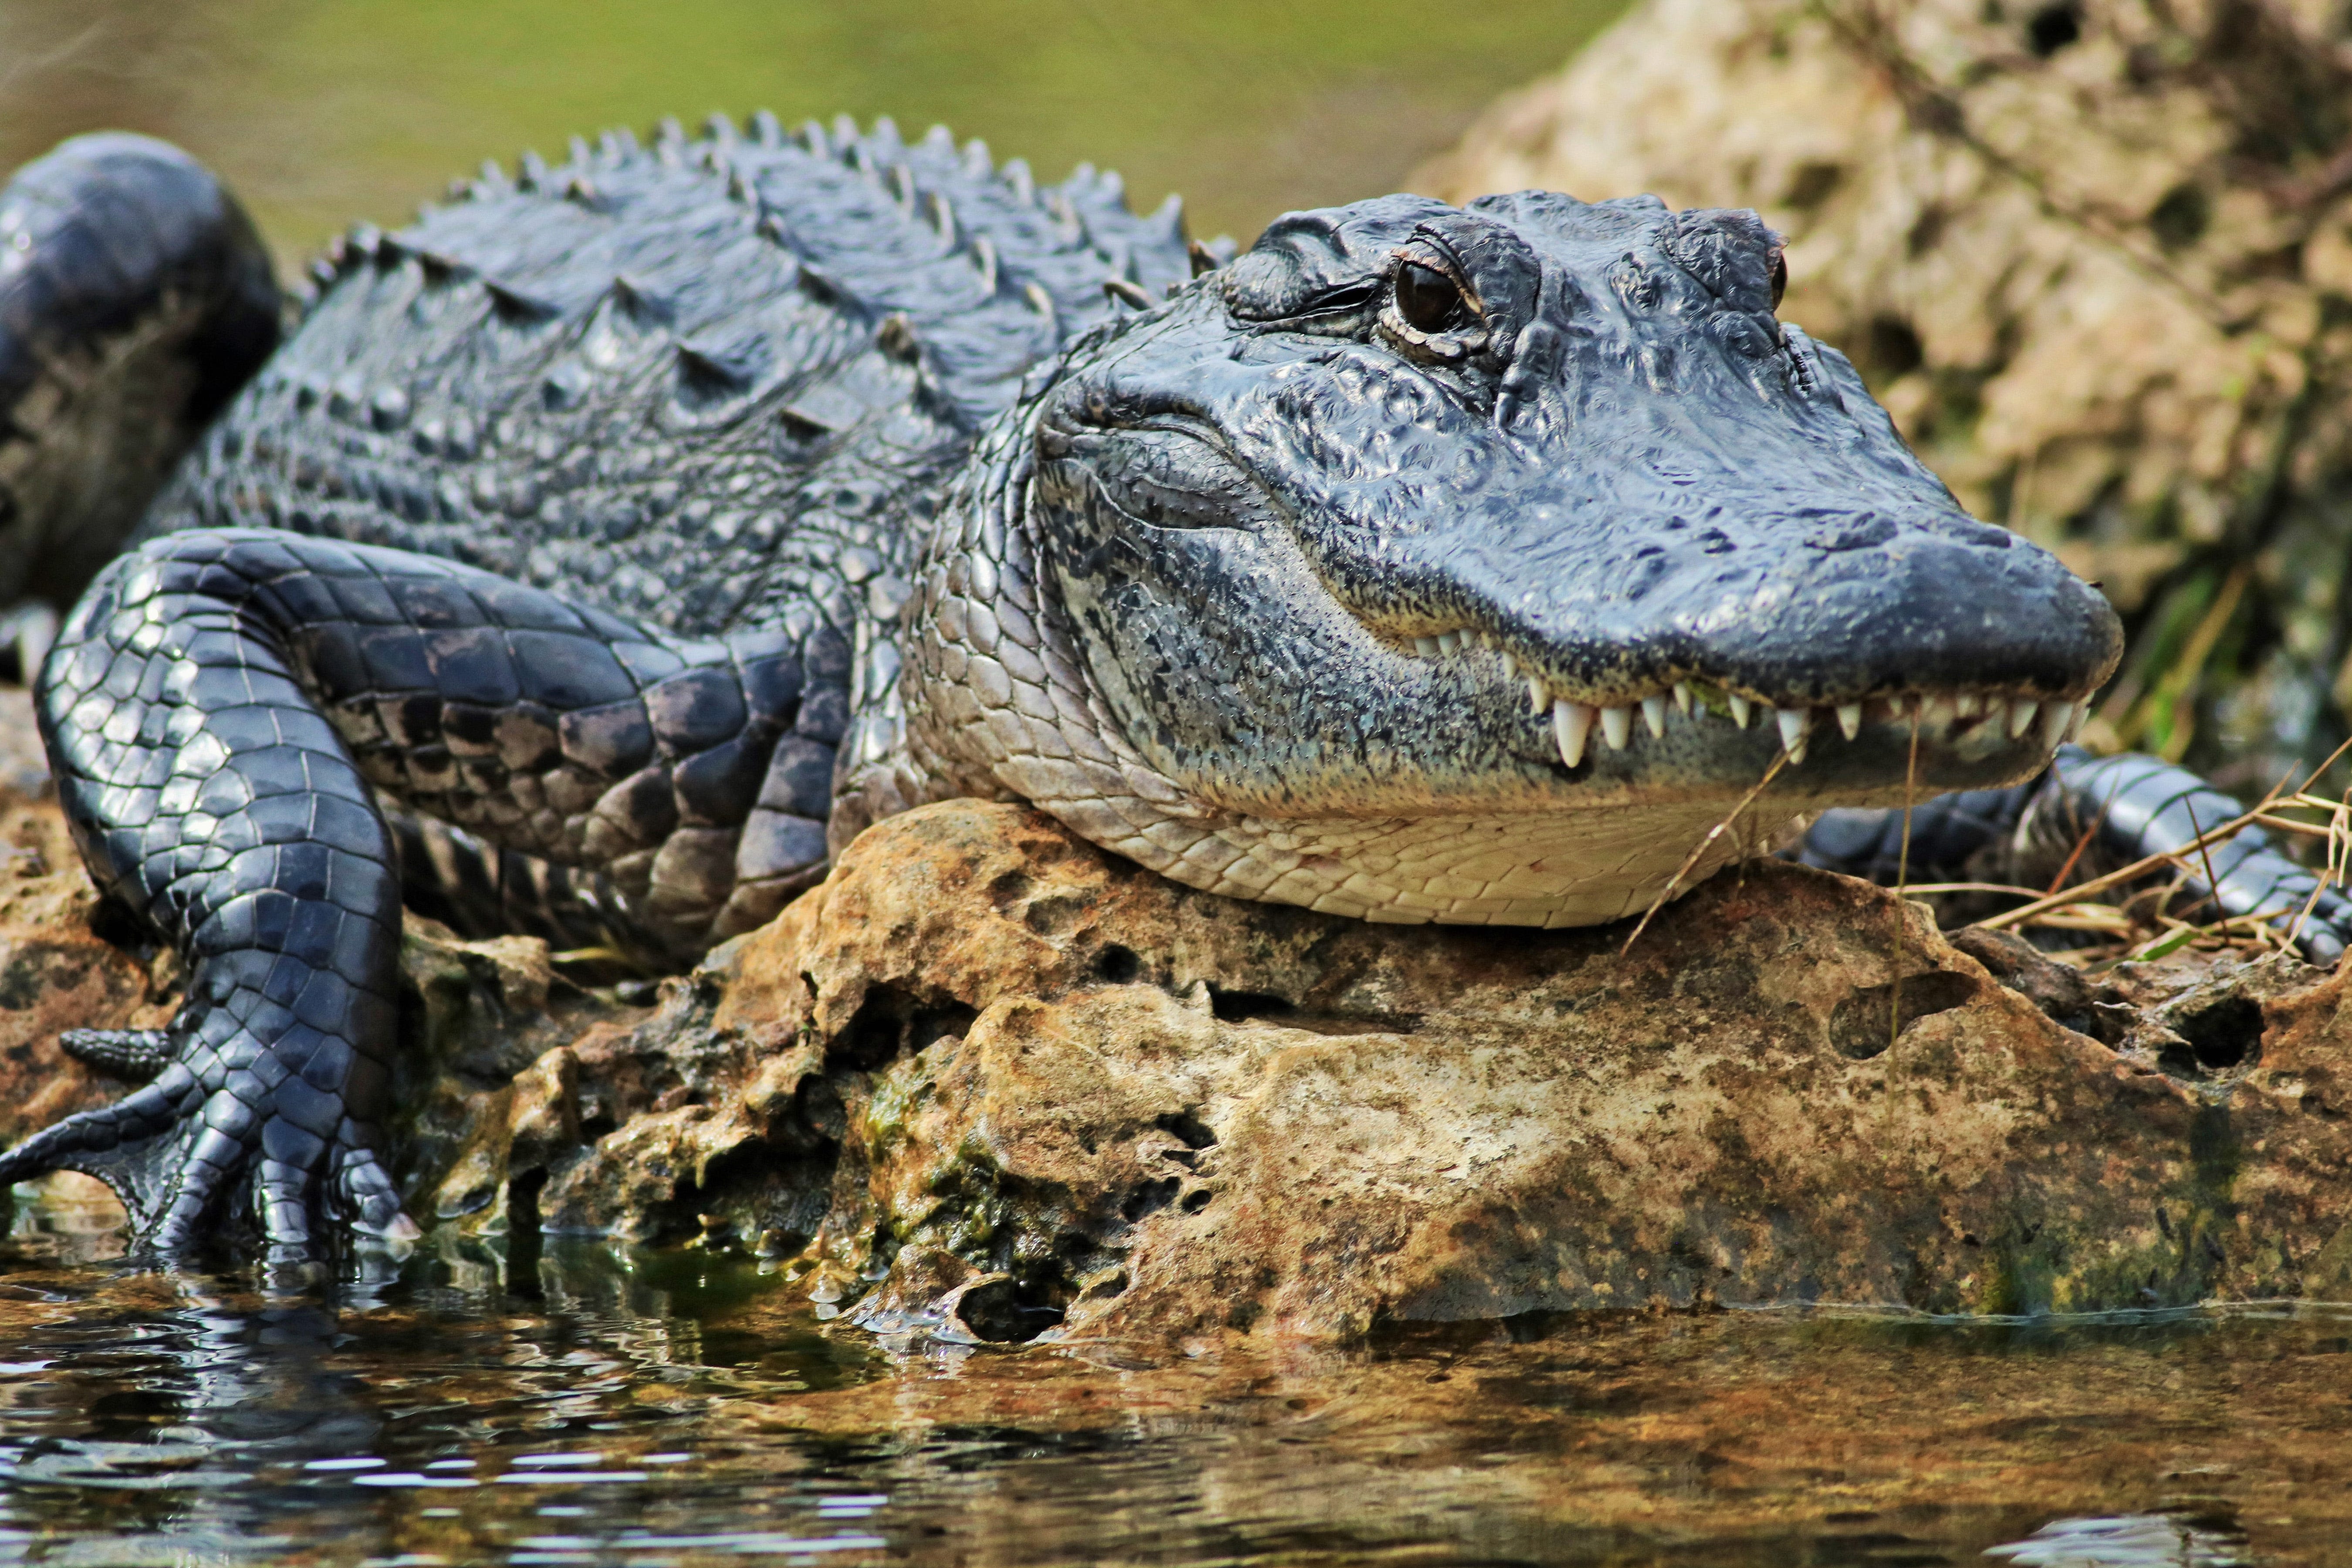 Gators in Mississippi: How common are alligator bites in MS? How to avoid them